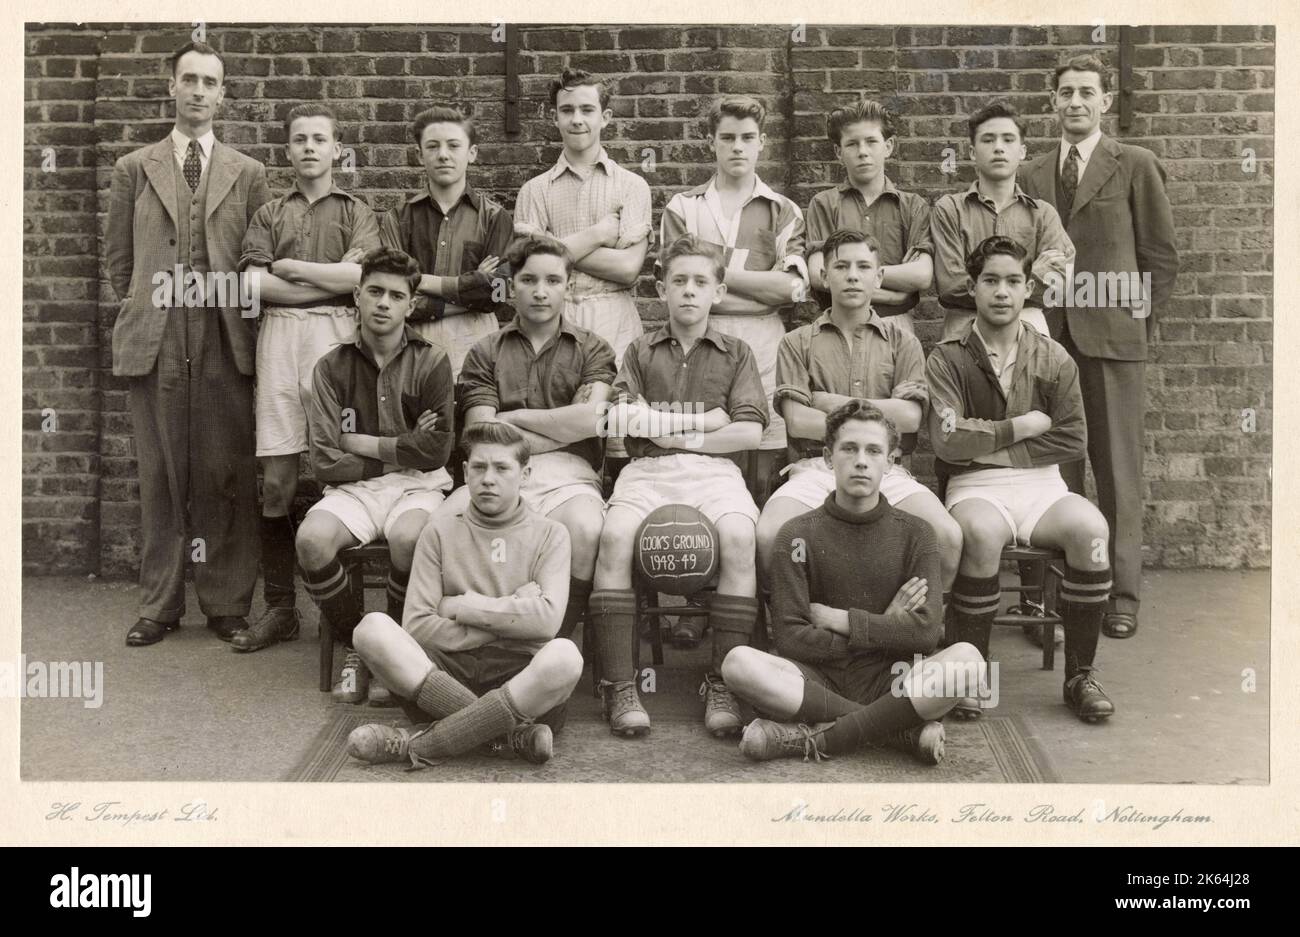 Football Team, Cook's Ground, 1948-1949 - the tall man (top left) is identified as Reg Pearce Stock Photo